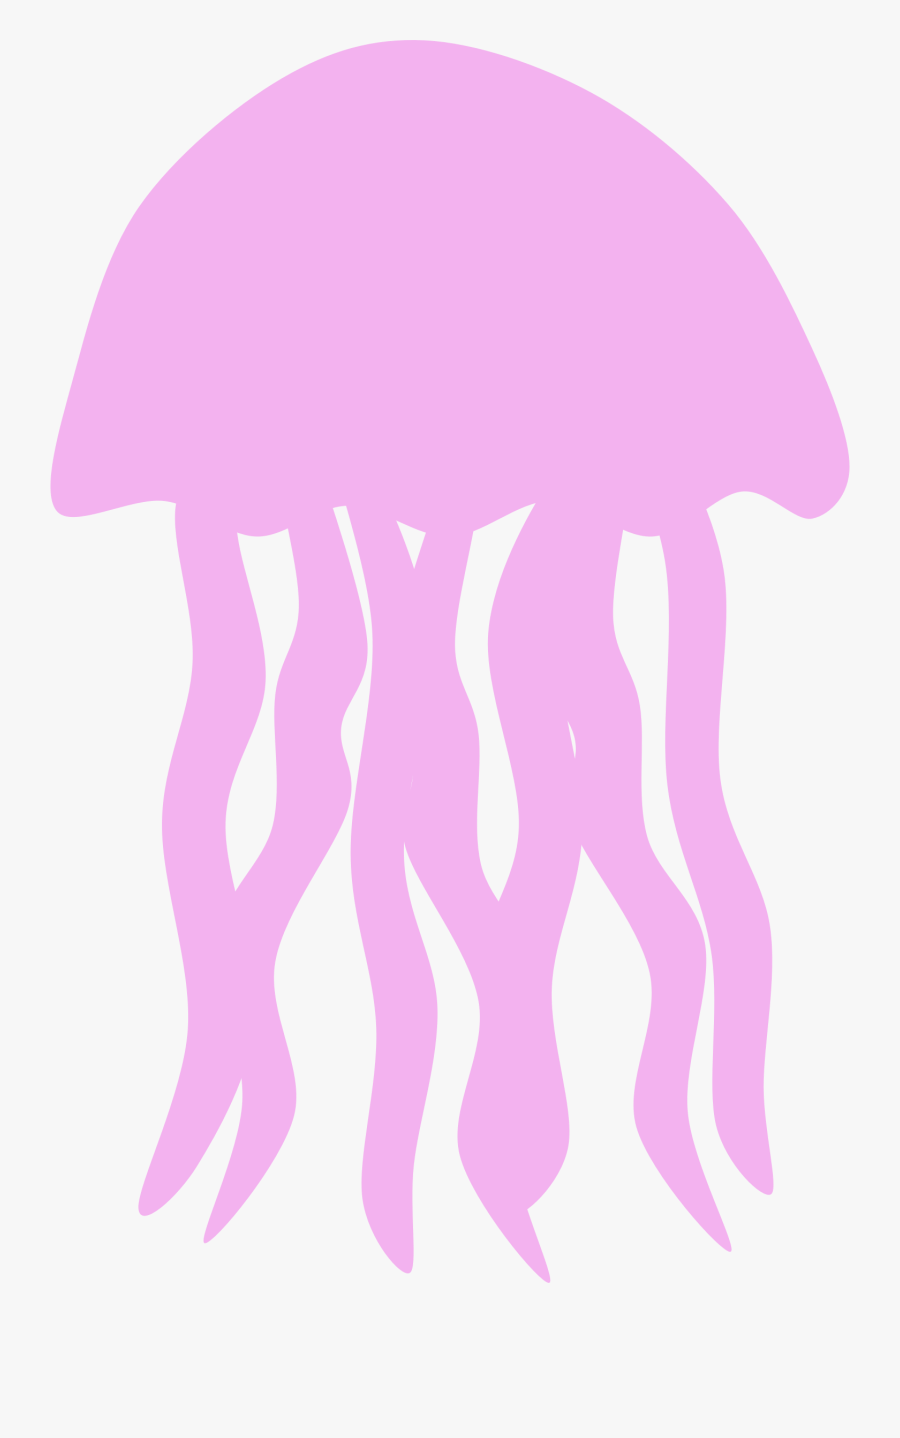 Silhouette By Scout A - Transparent Background Jelly Fish Clipart, Transparent Clipart